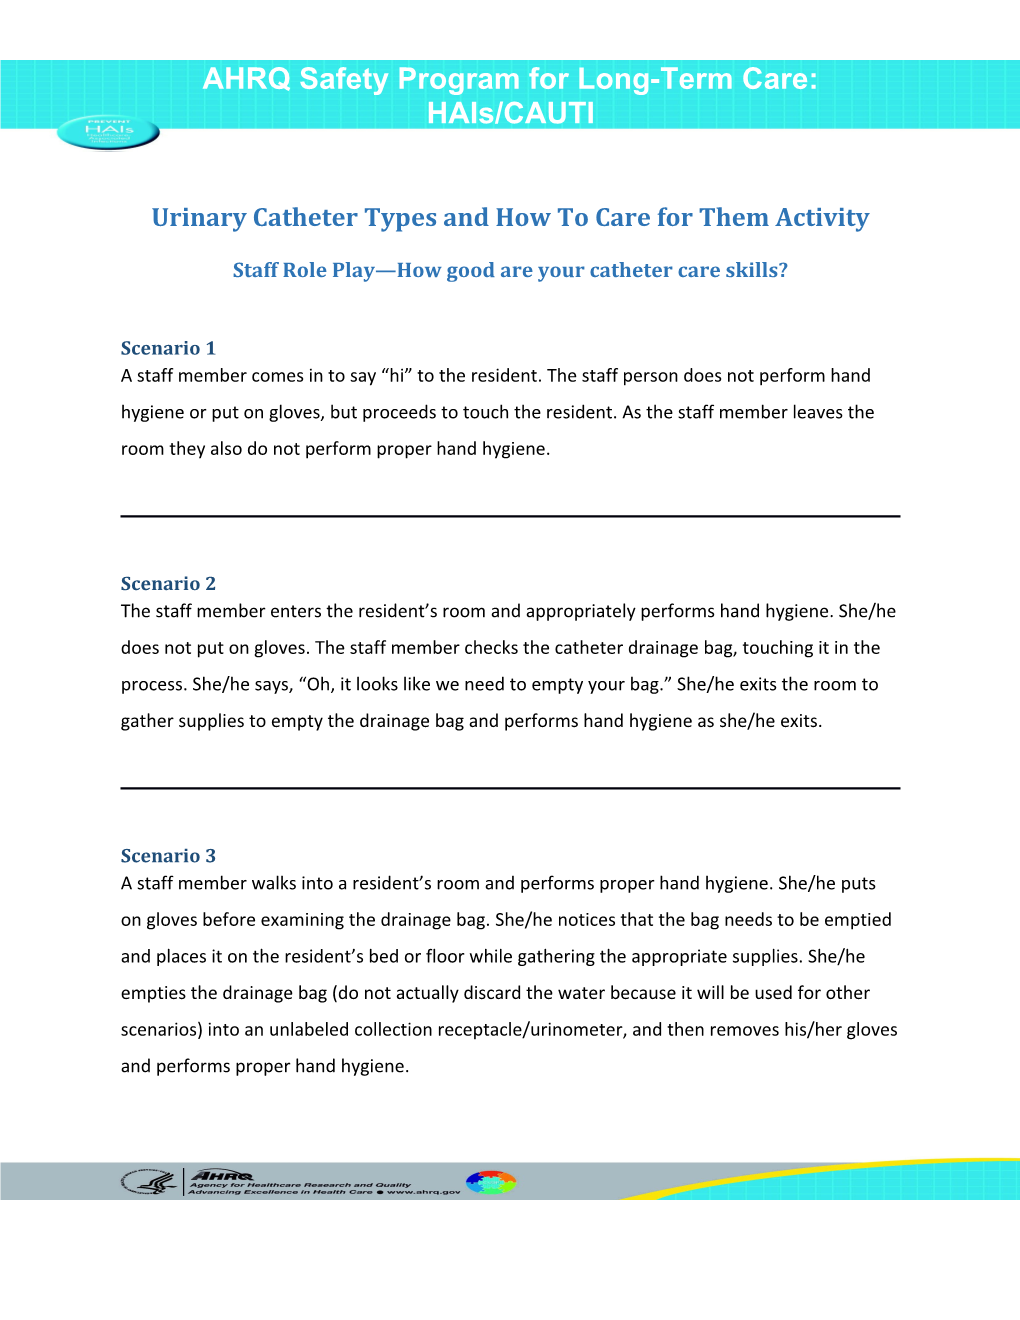 Urinary Catheter Types and How to Care for Them Activity